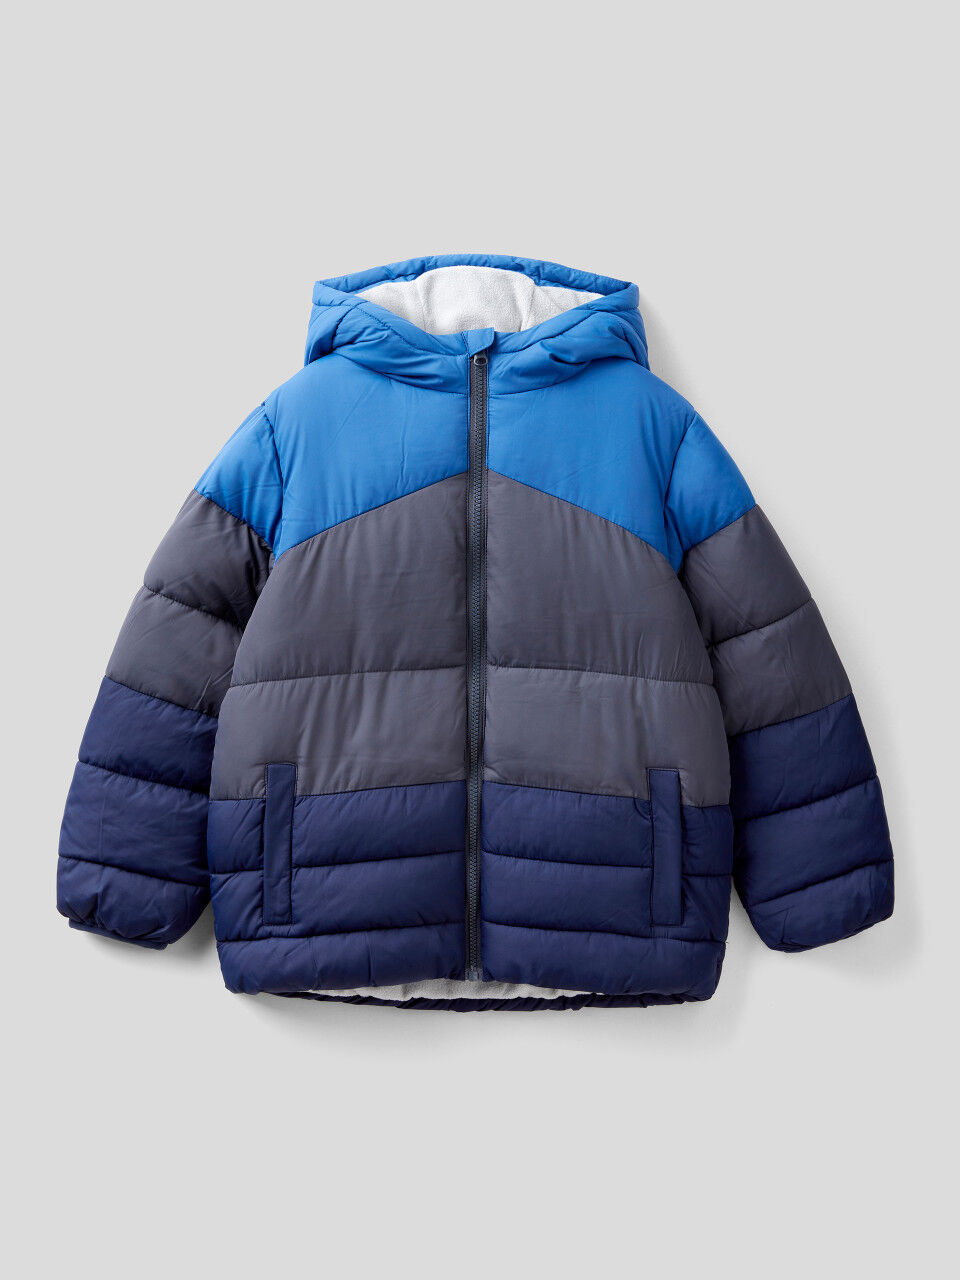 Benetton BNWT United Colours Of Benetton Baby Boys Jacket Formal Casual Navy 90 2Y $90 